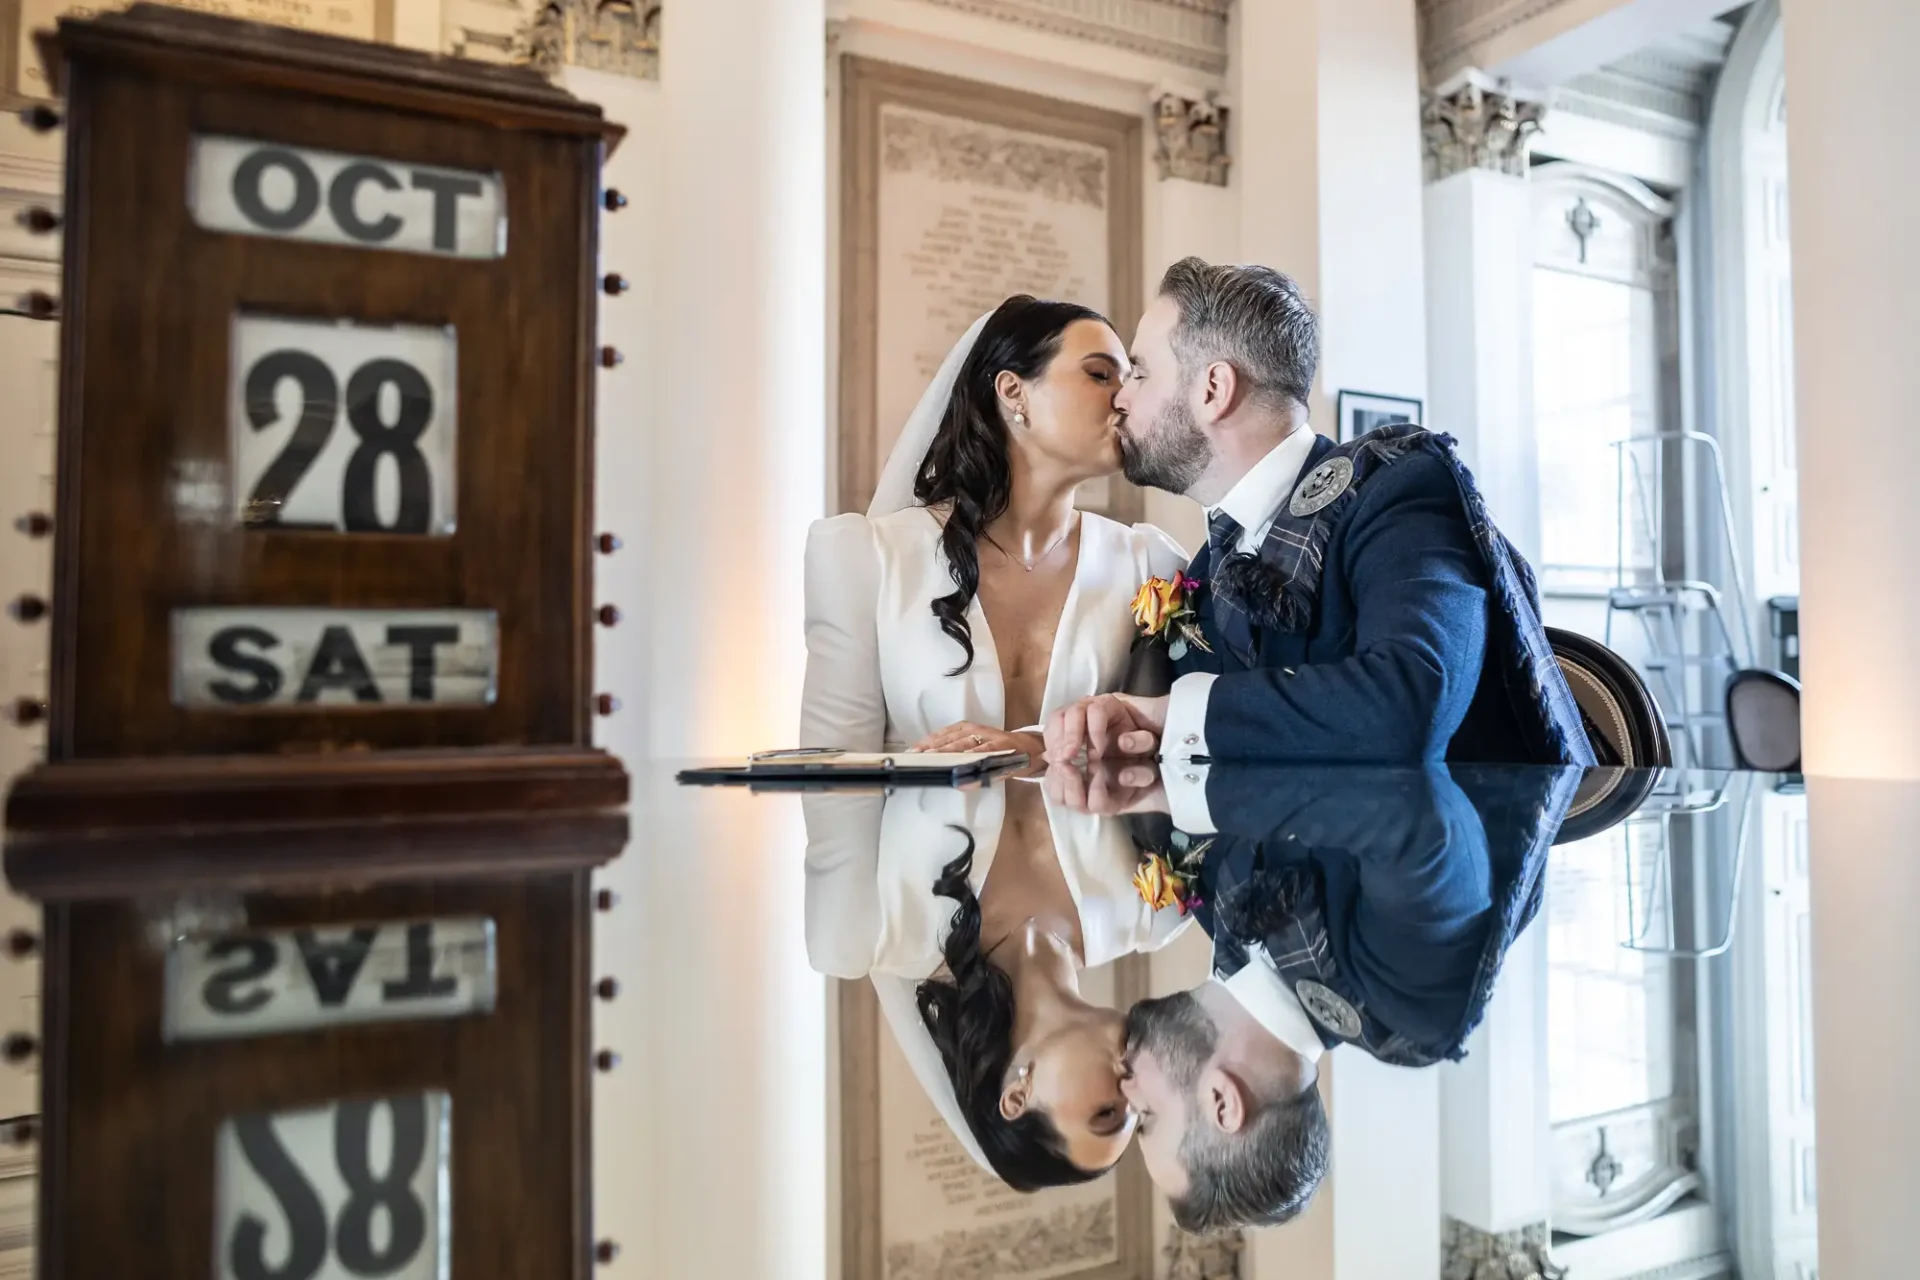 A bride and groom kissing, reflected in a glass table, with a nearby standing calendar showing the date october 28.